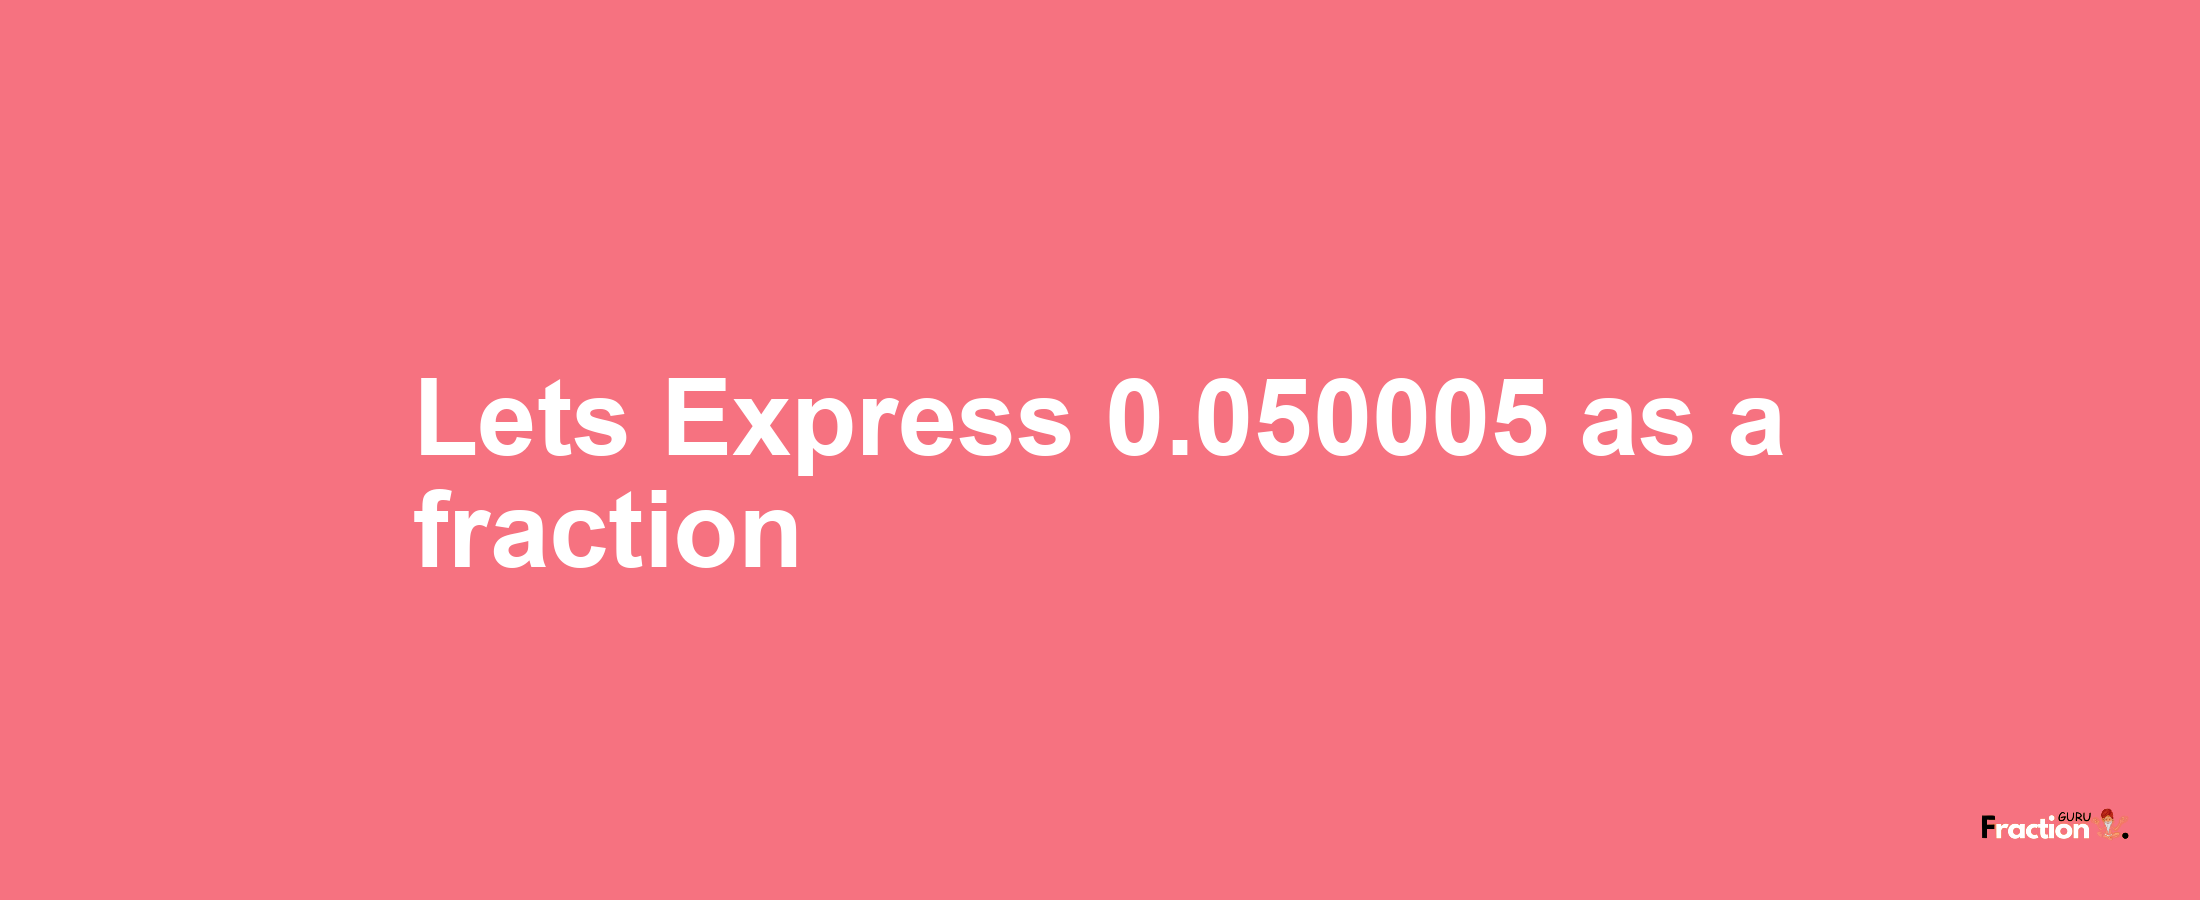 Lets Express 0.050005 as afraction